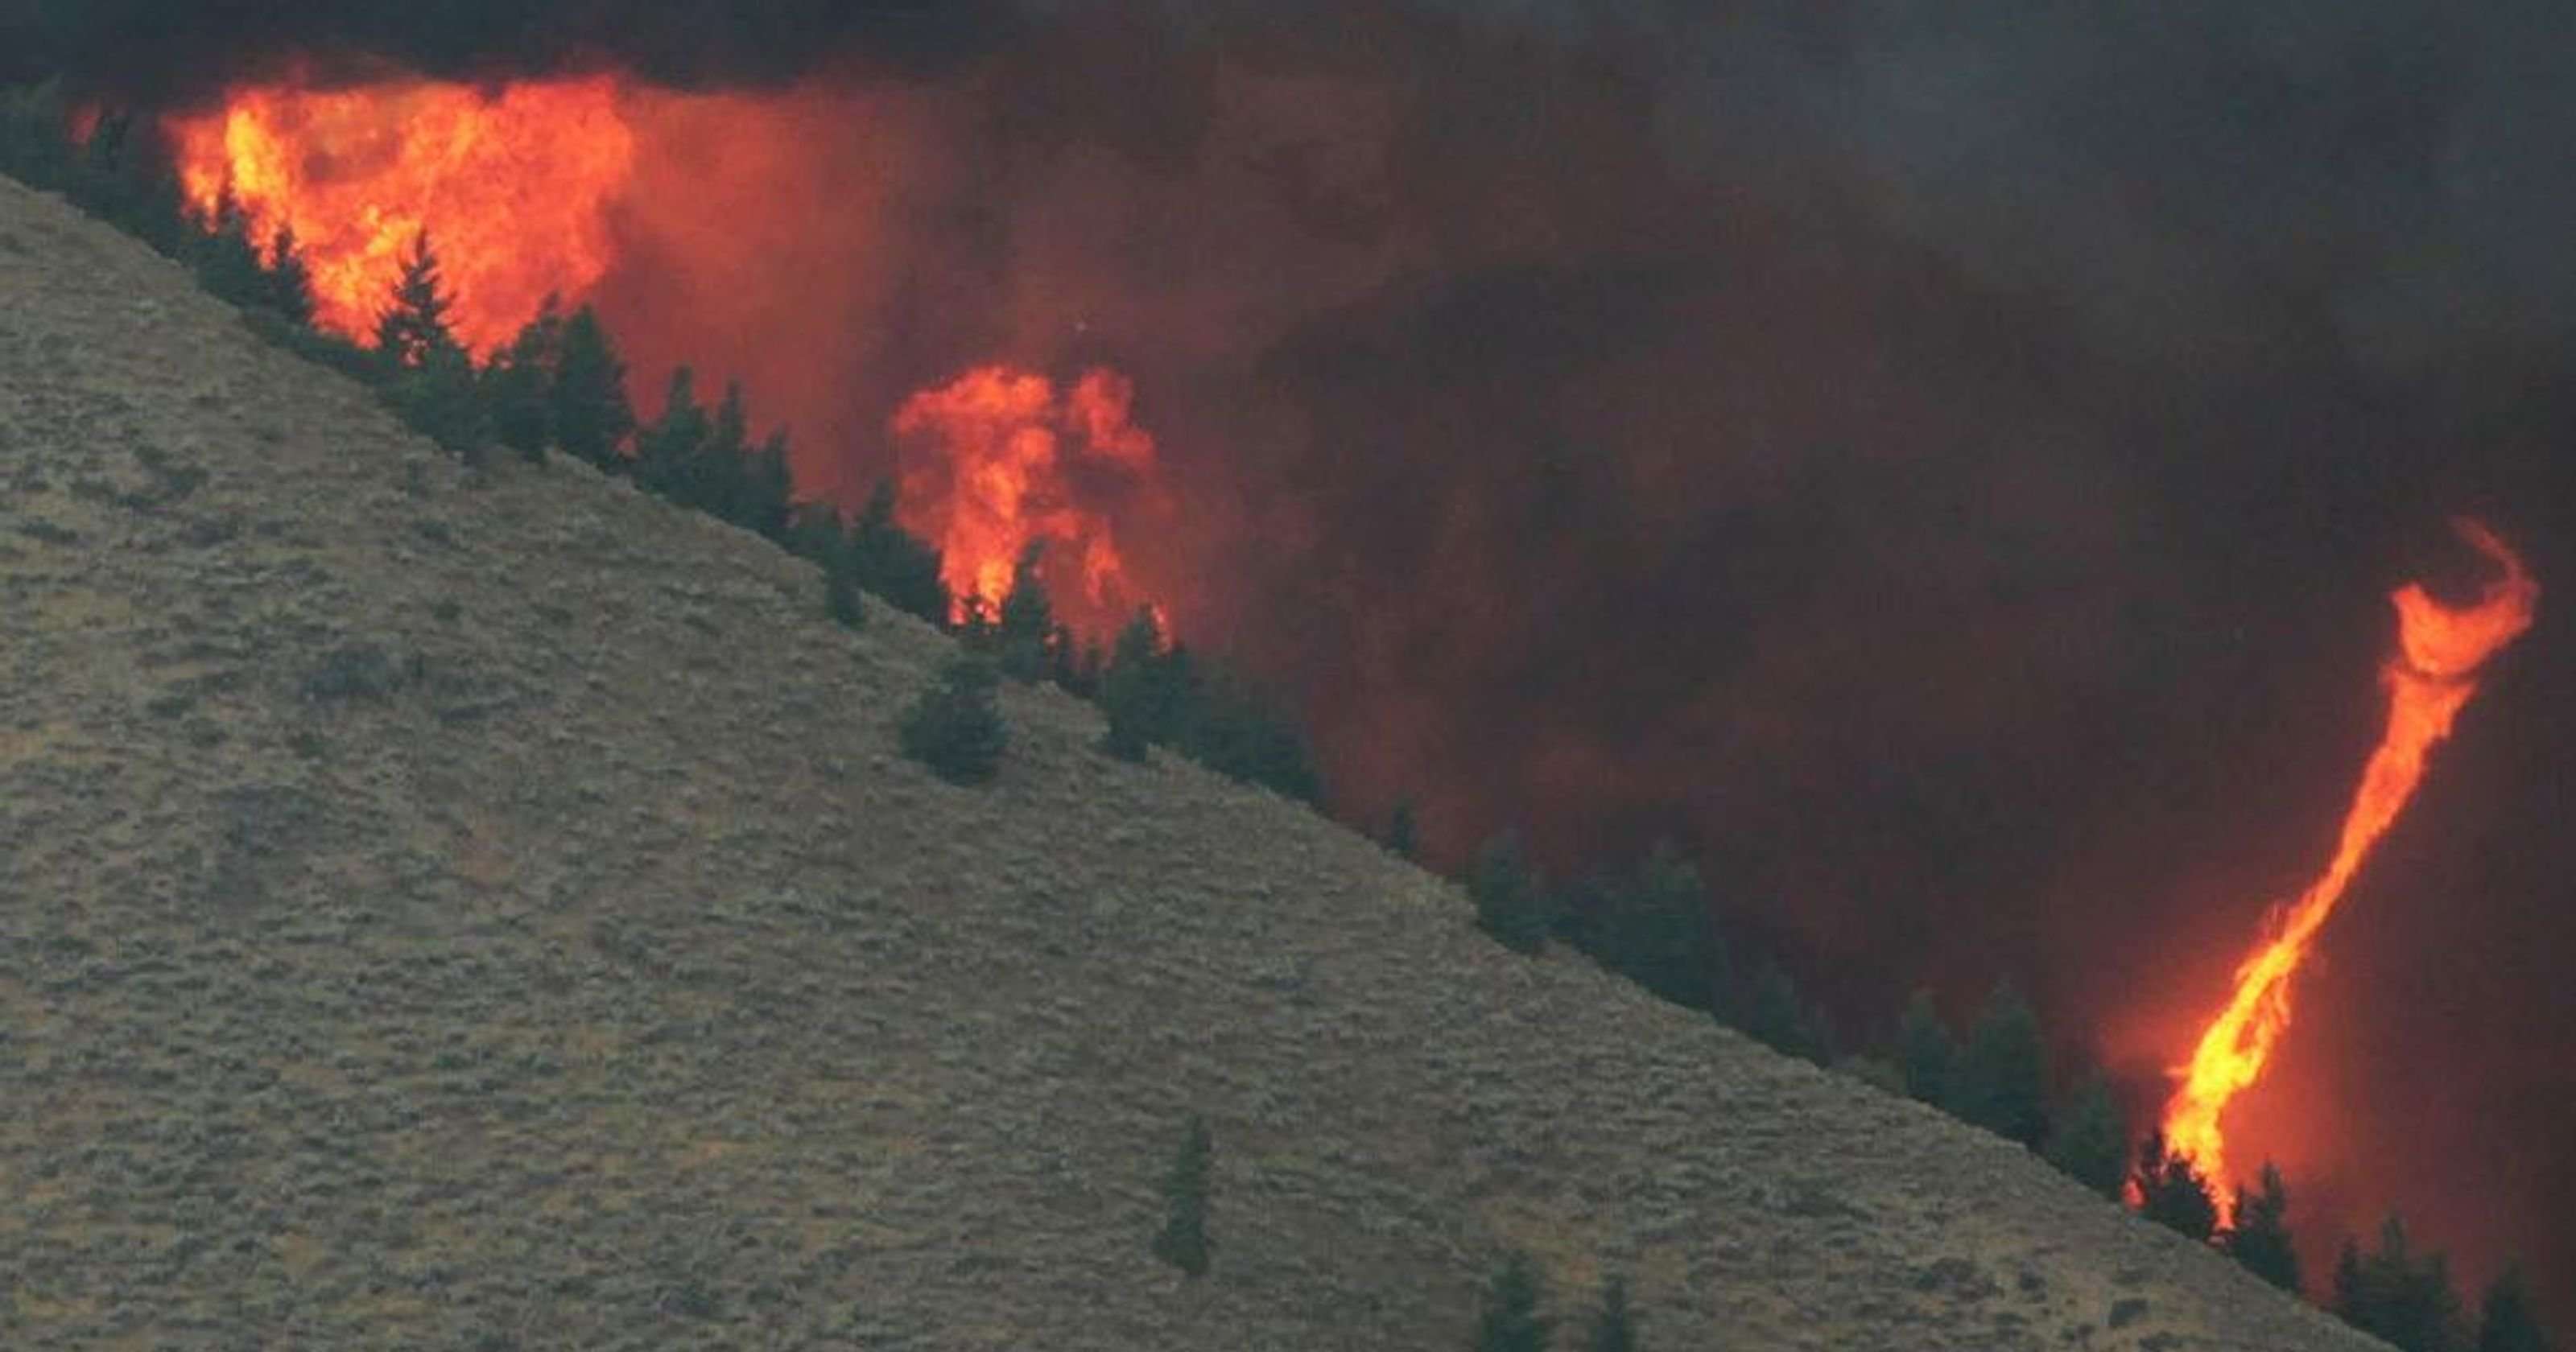 image for California 'fire tornado' had 143 mph winds, possibly state's strongest twister ever